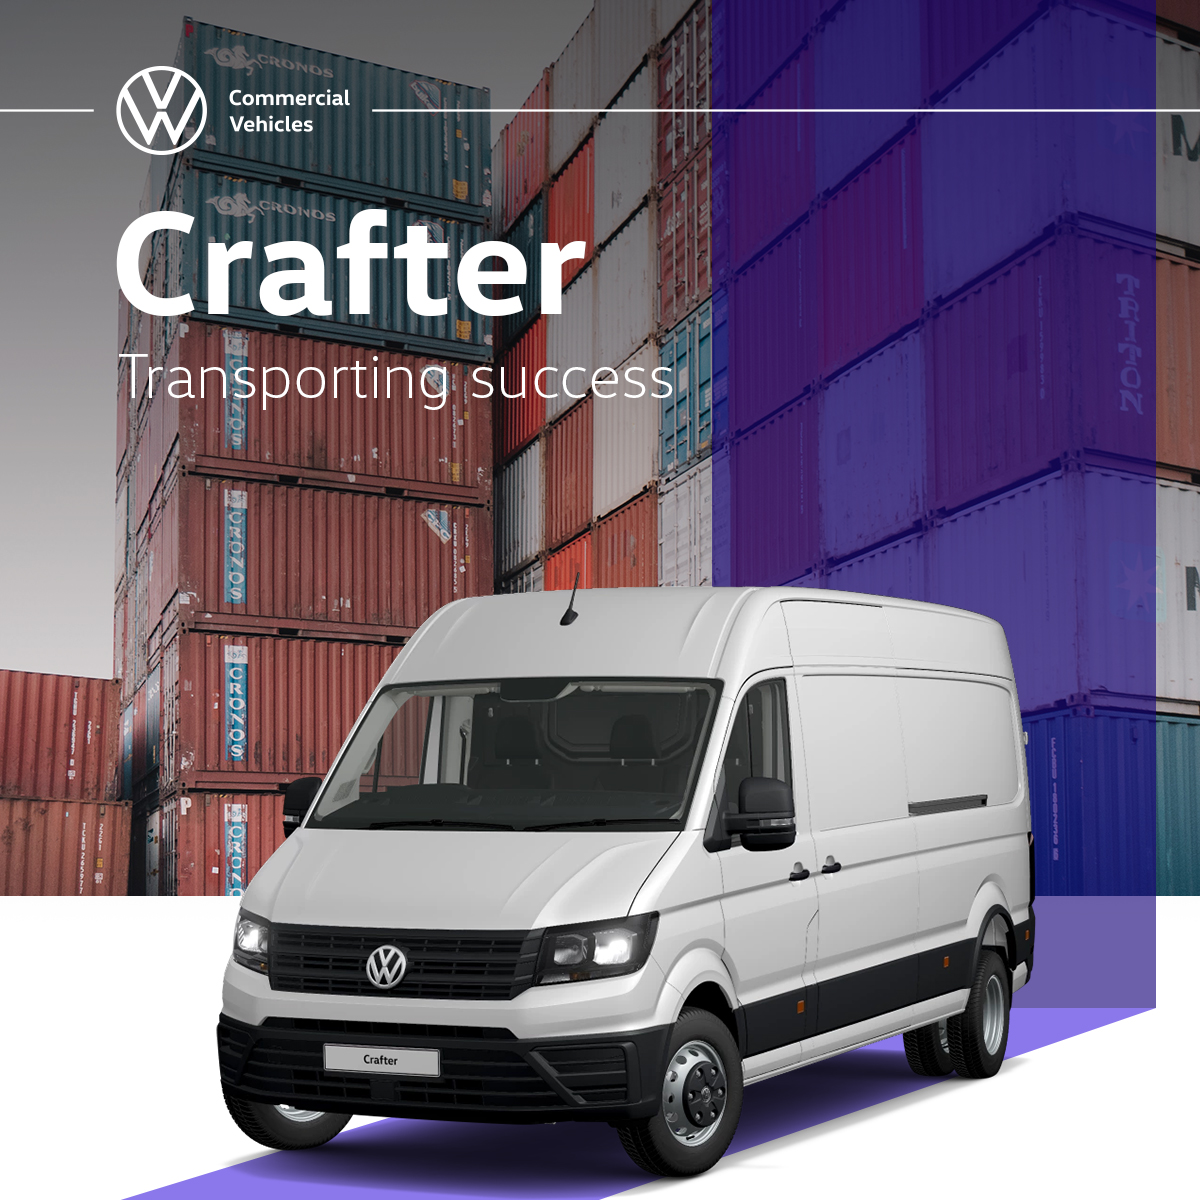 Unleash the power of versatility with the VW Crafter! From cargo to passengers, it's your go-to solution. Discover more: 👇 vw.co.za/en/models/craf…. #Volkswagen #VWCrafter #VolkswagenCommercialVehicles #LetsWork